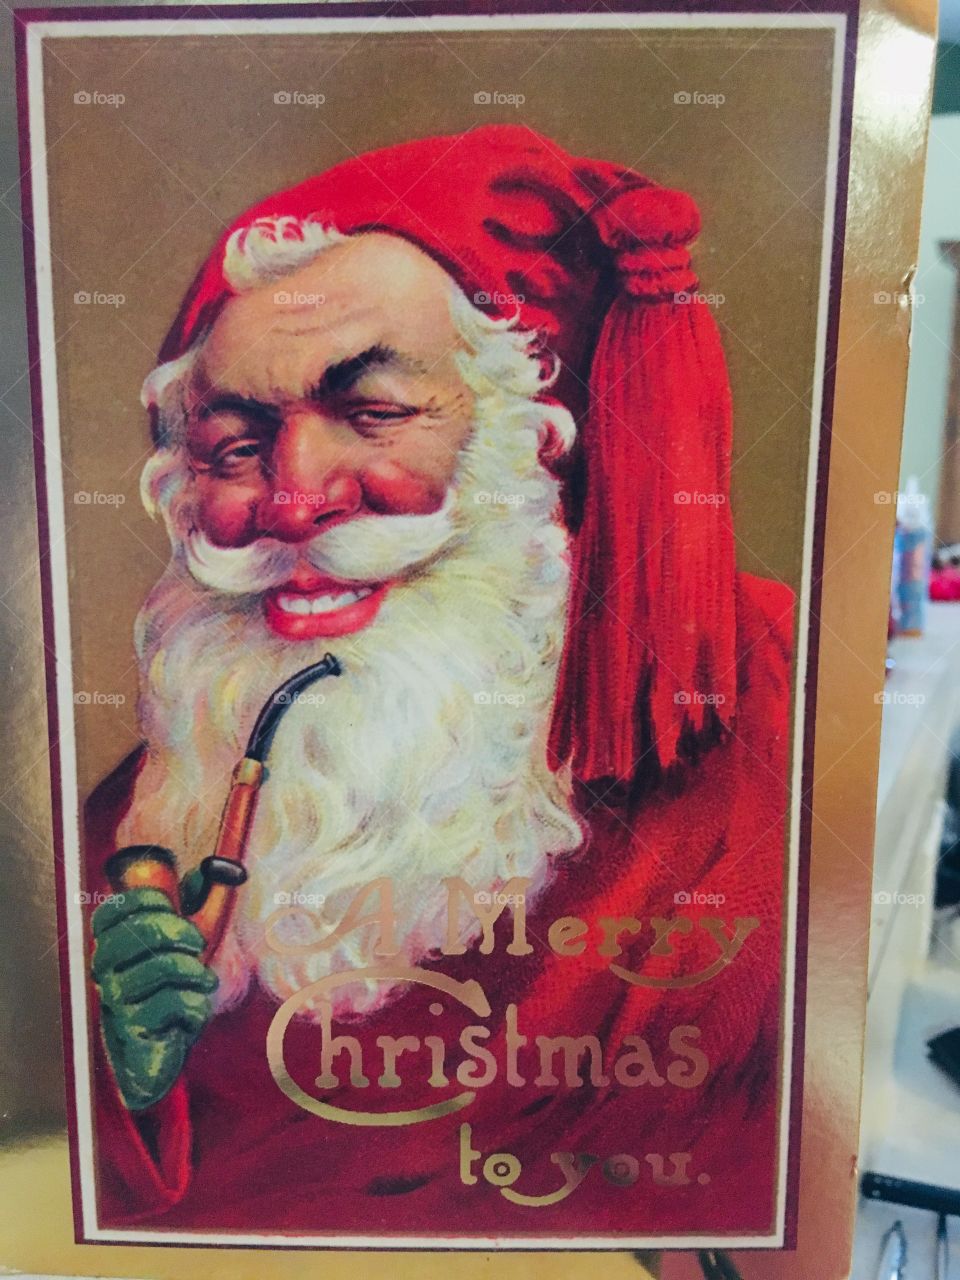 Creepiest Santa I have EVER seen. Santa has a pipe and dressed in red with black eyebrows 😳